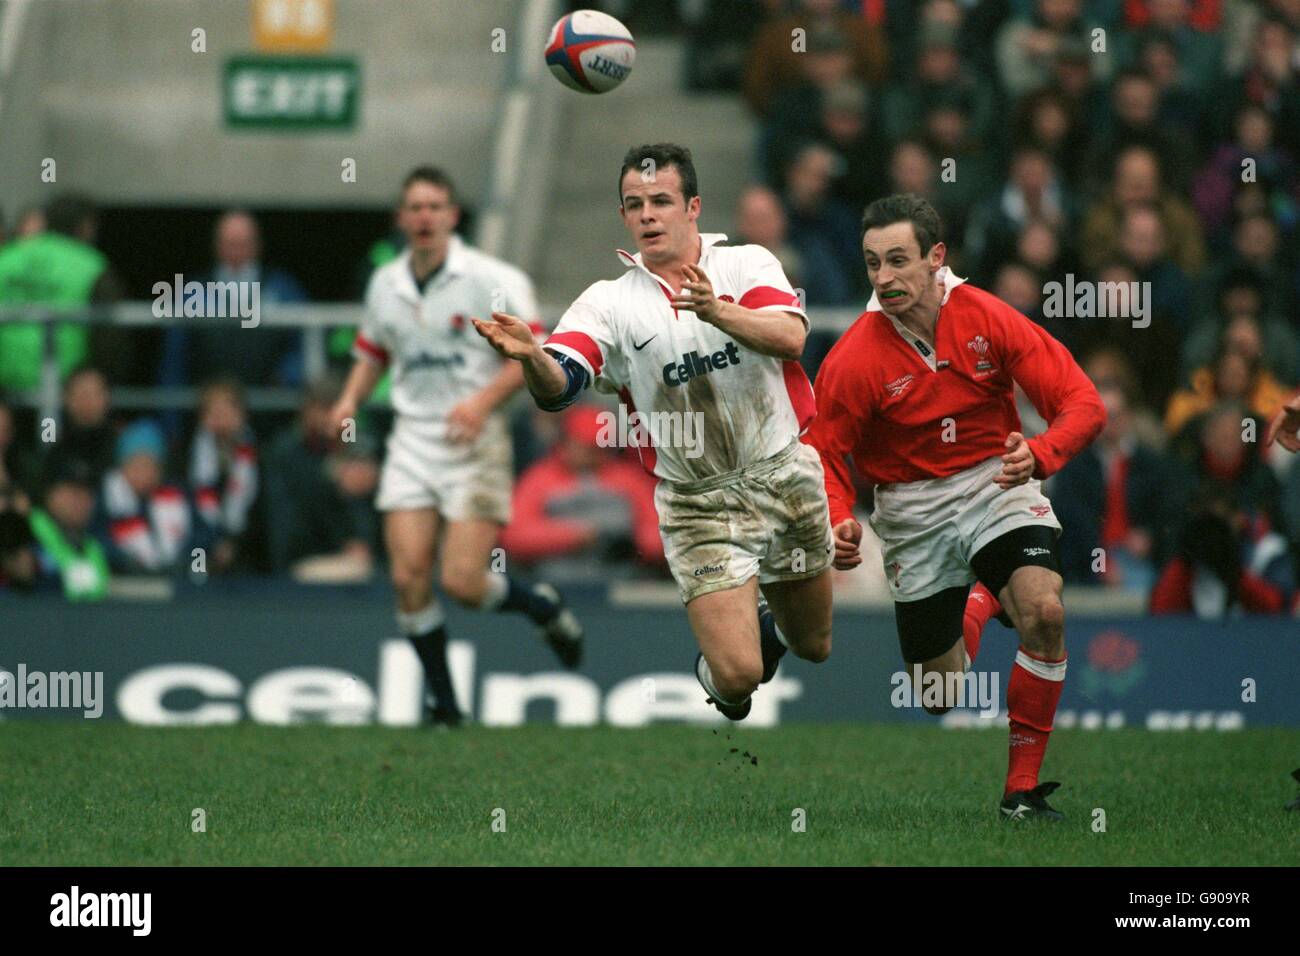 Rugby Union - Five Nations Championship - England v Wales. England's Austin Healey and Wales's Wayne Proctor (Cellnet) Stock Photo